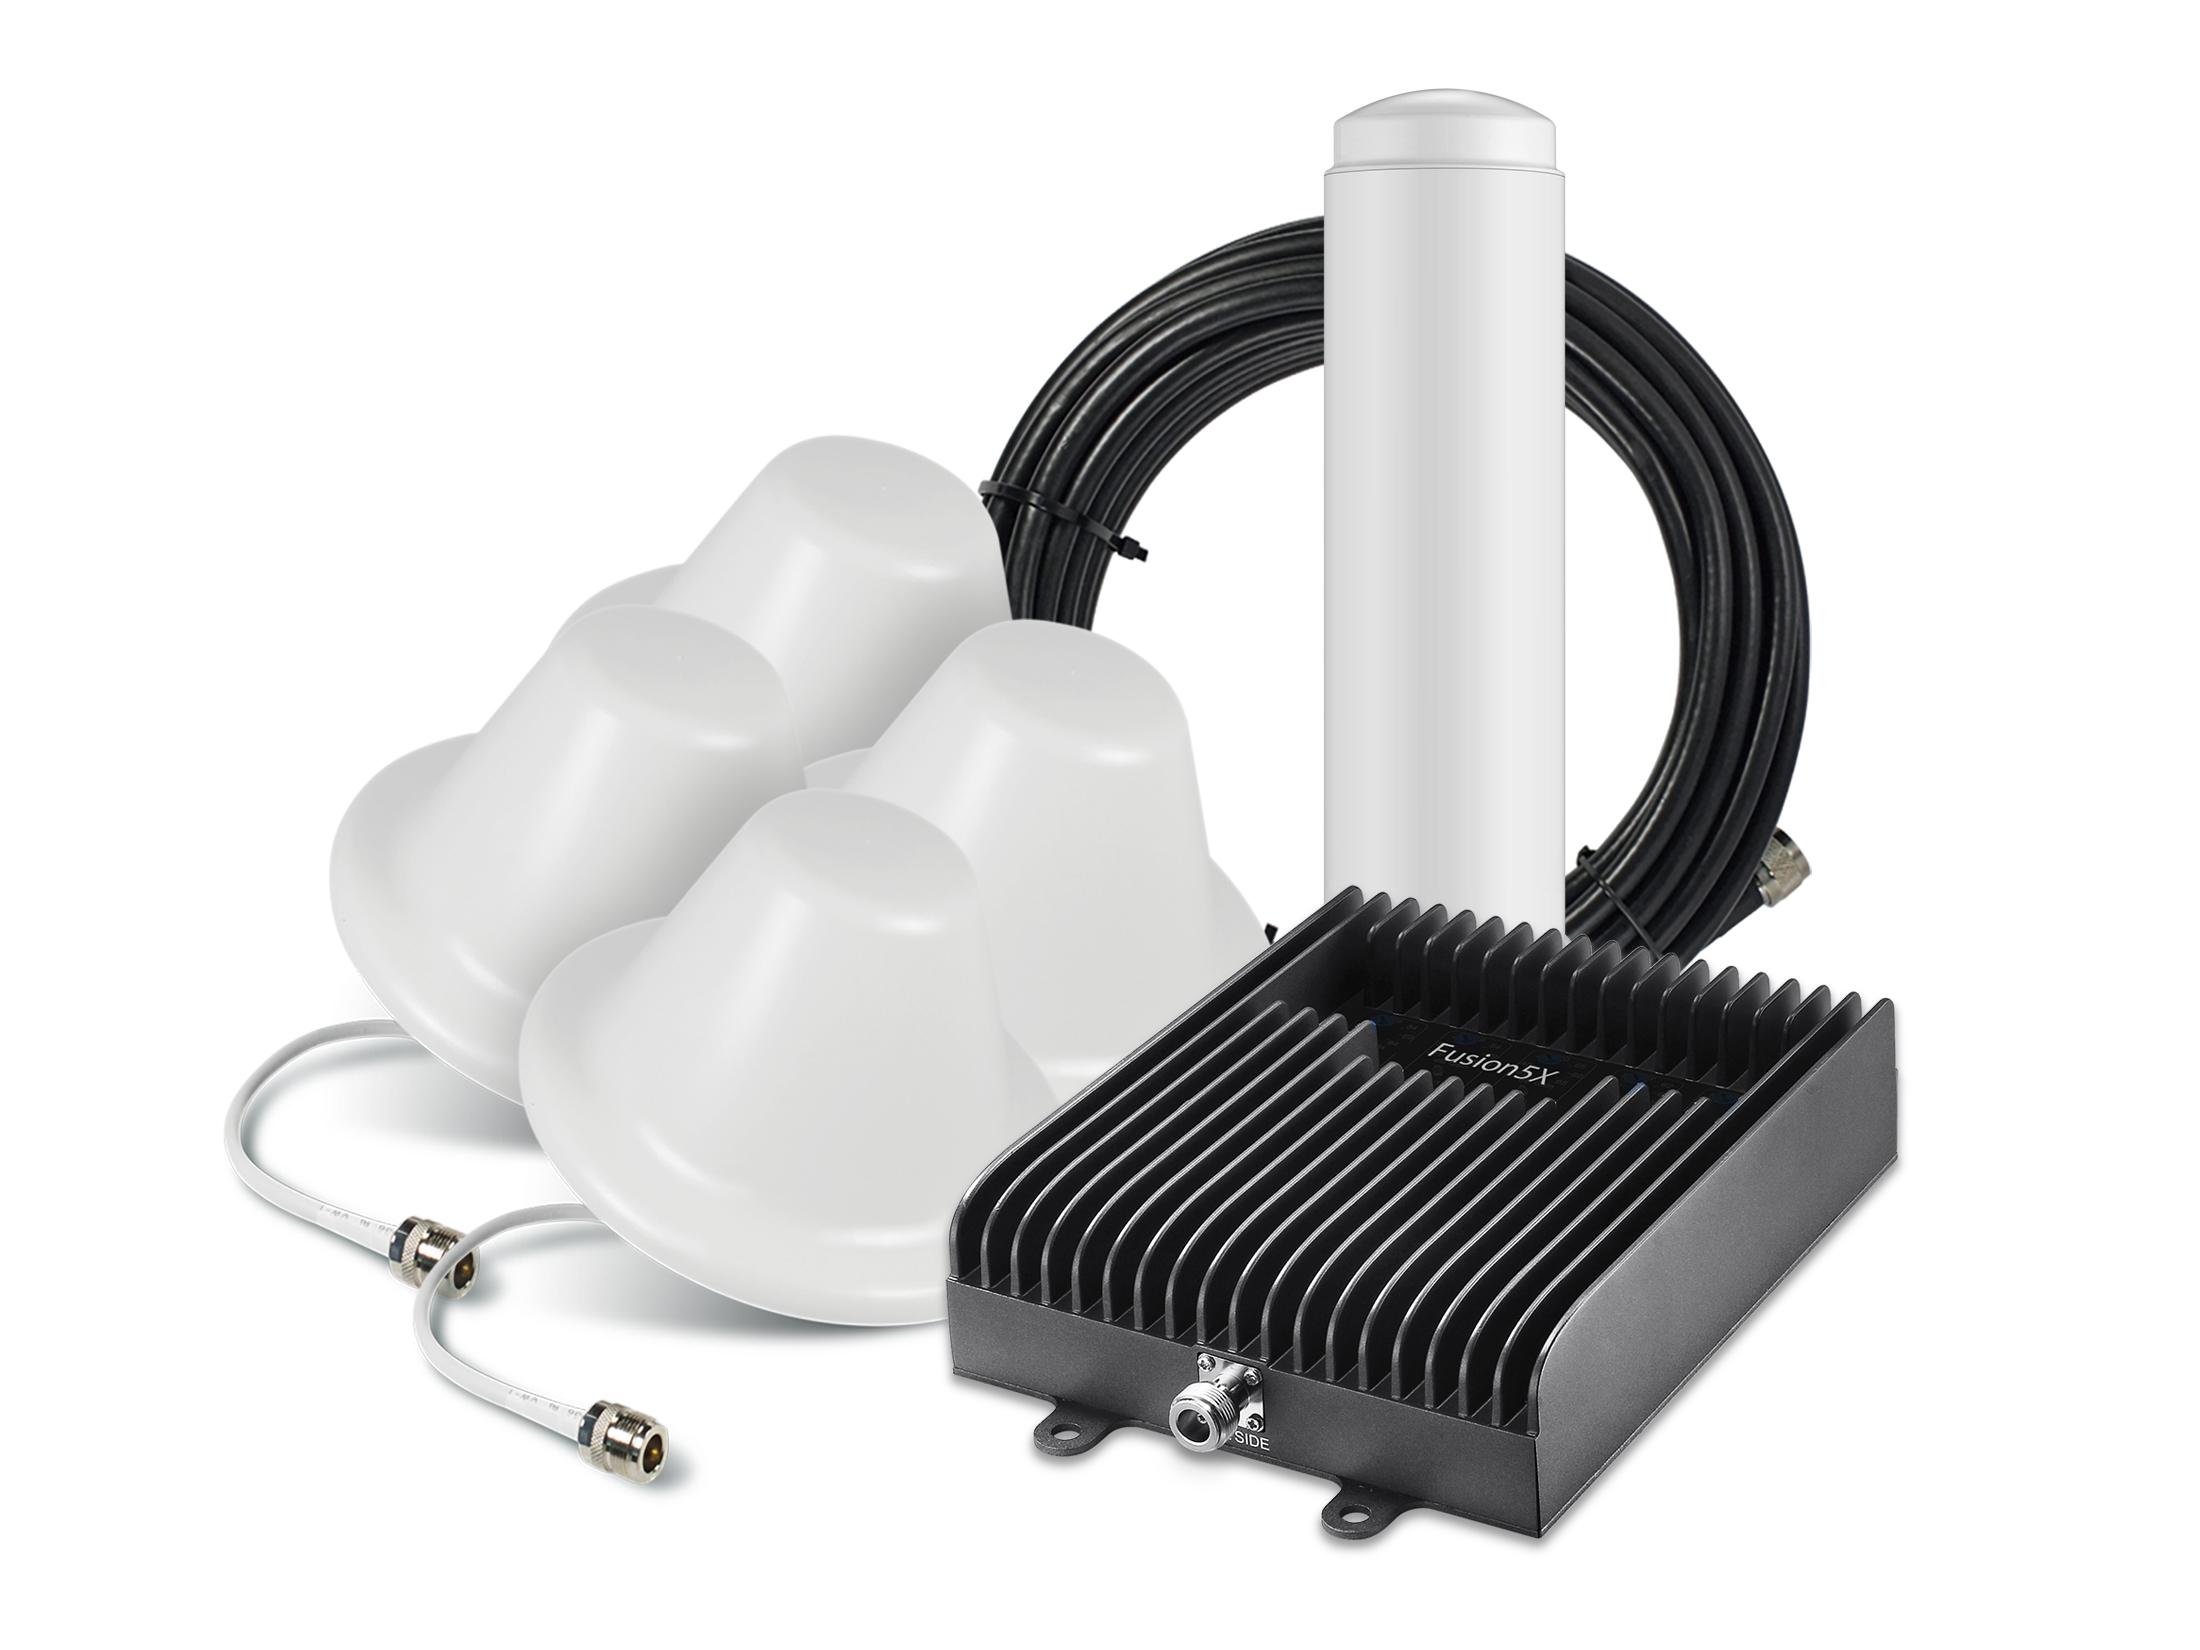 SC-Fusion5X2-O4D Fusion5X 2.0 cell phone signal booster kit with Omni Outside and 4 Dome Inside Antennas by SureCall